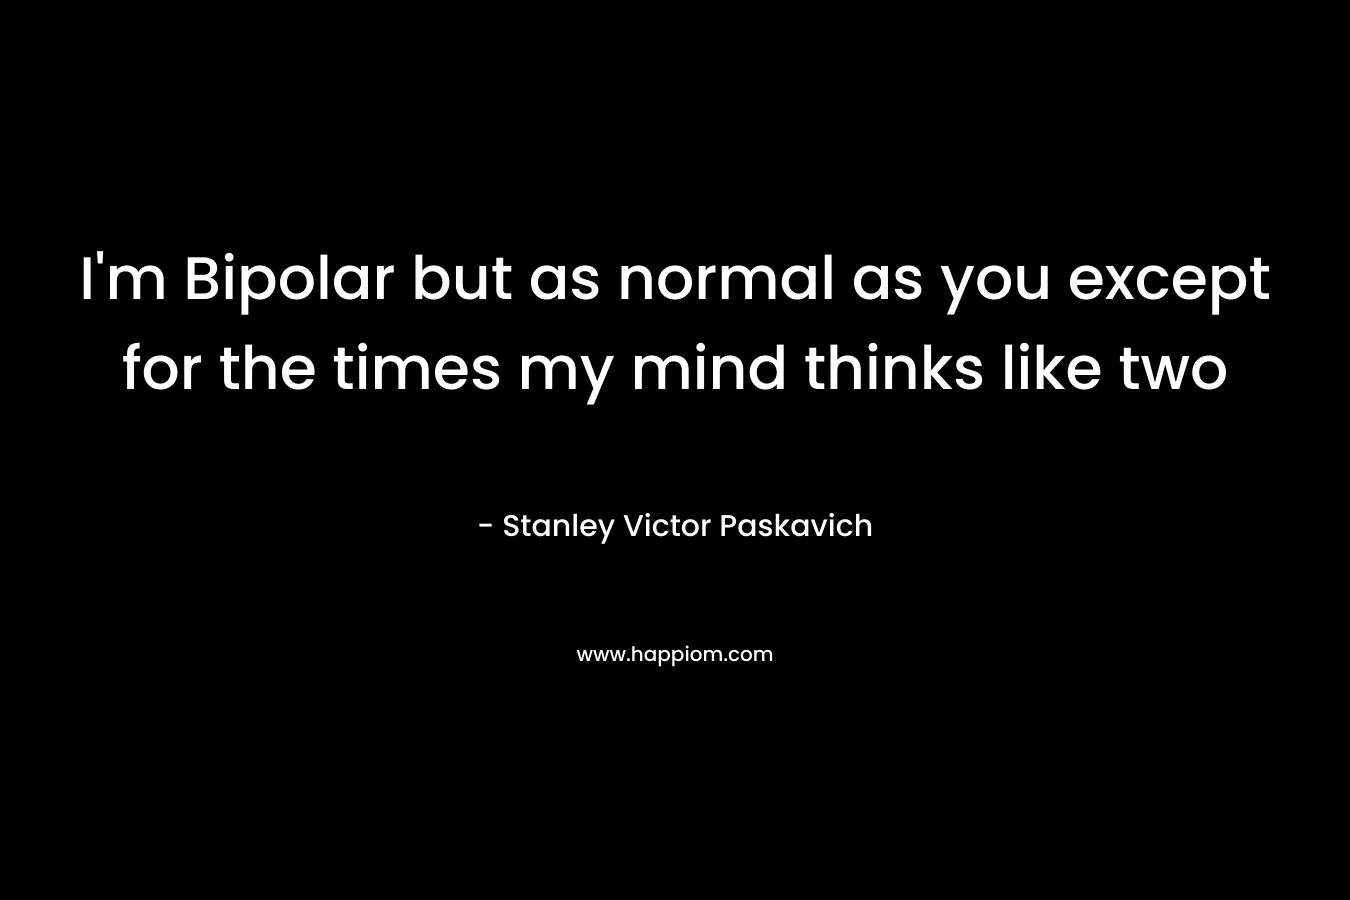 I’m Bipolar but as normal as you except for the times my mind thinks like two – Stanley Victor Paskavich